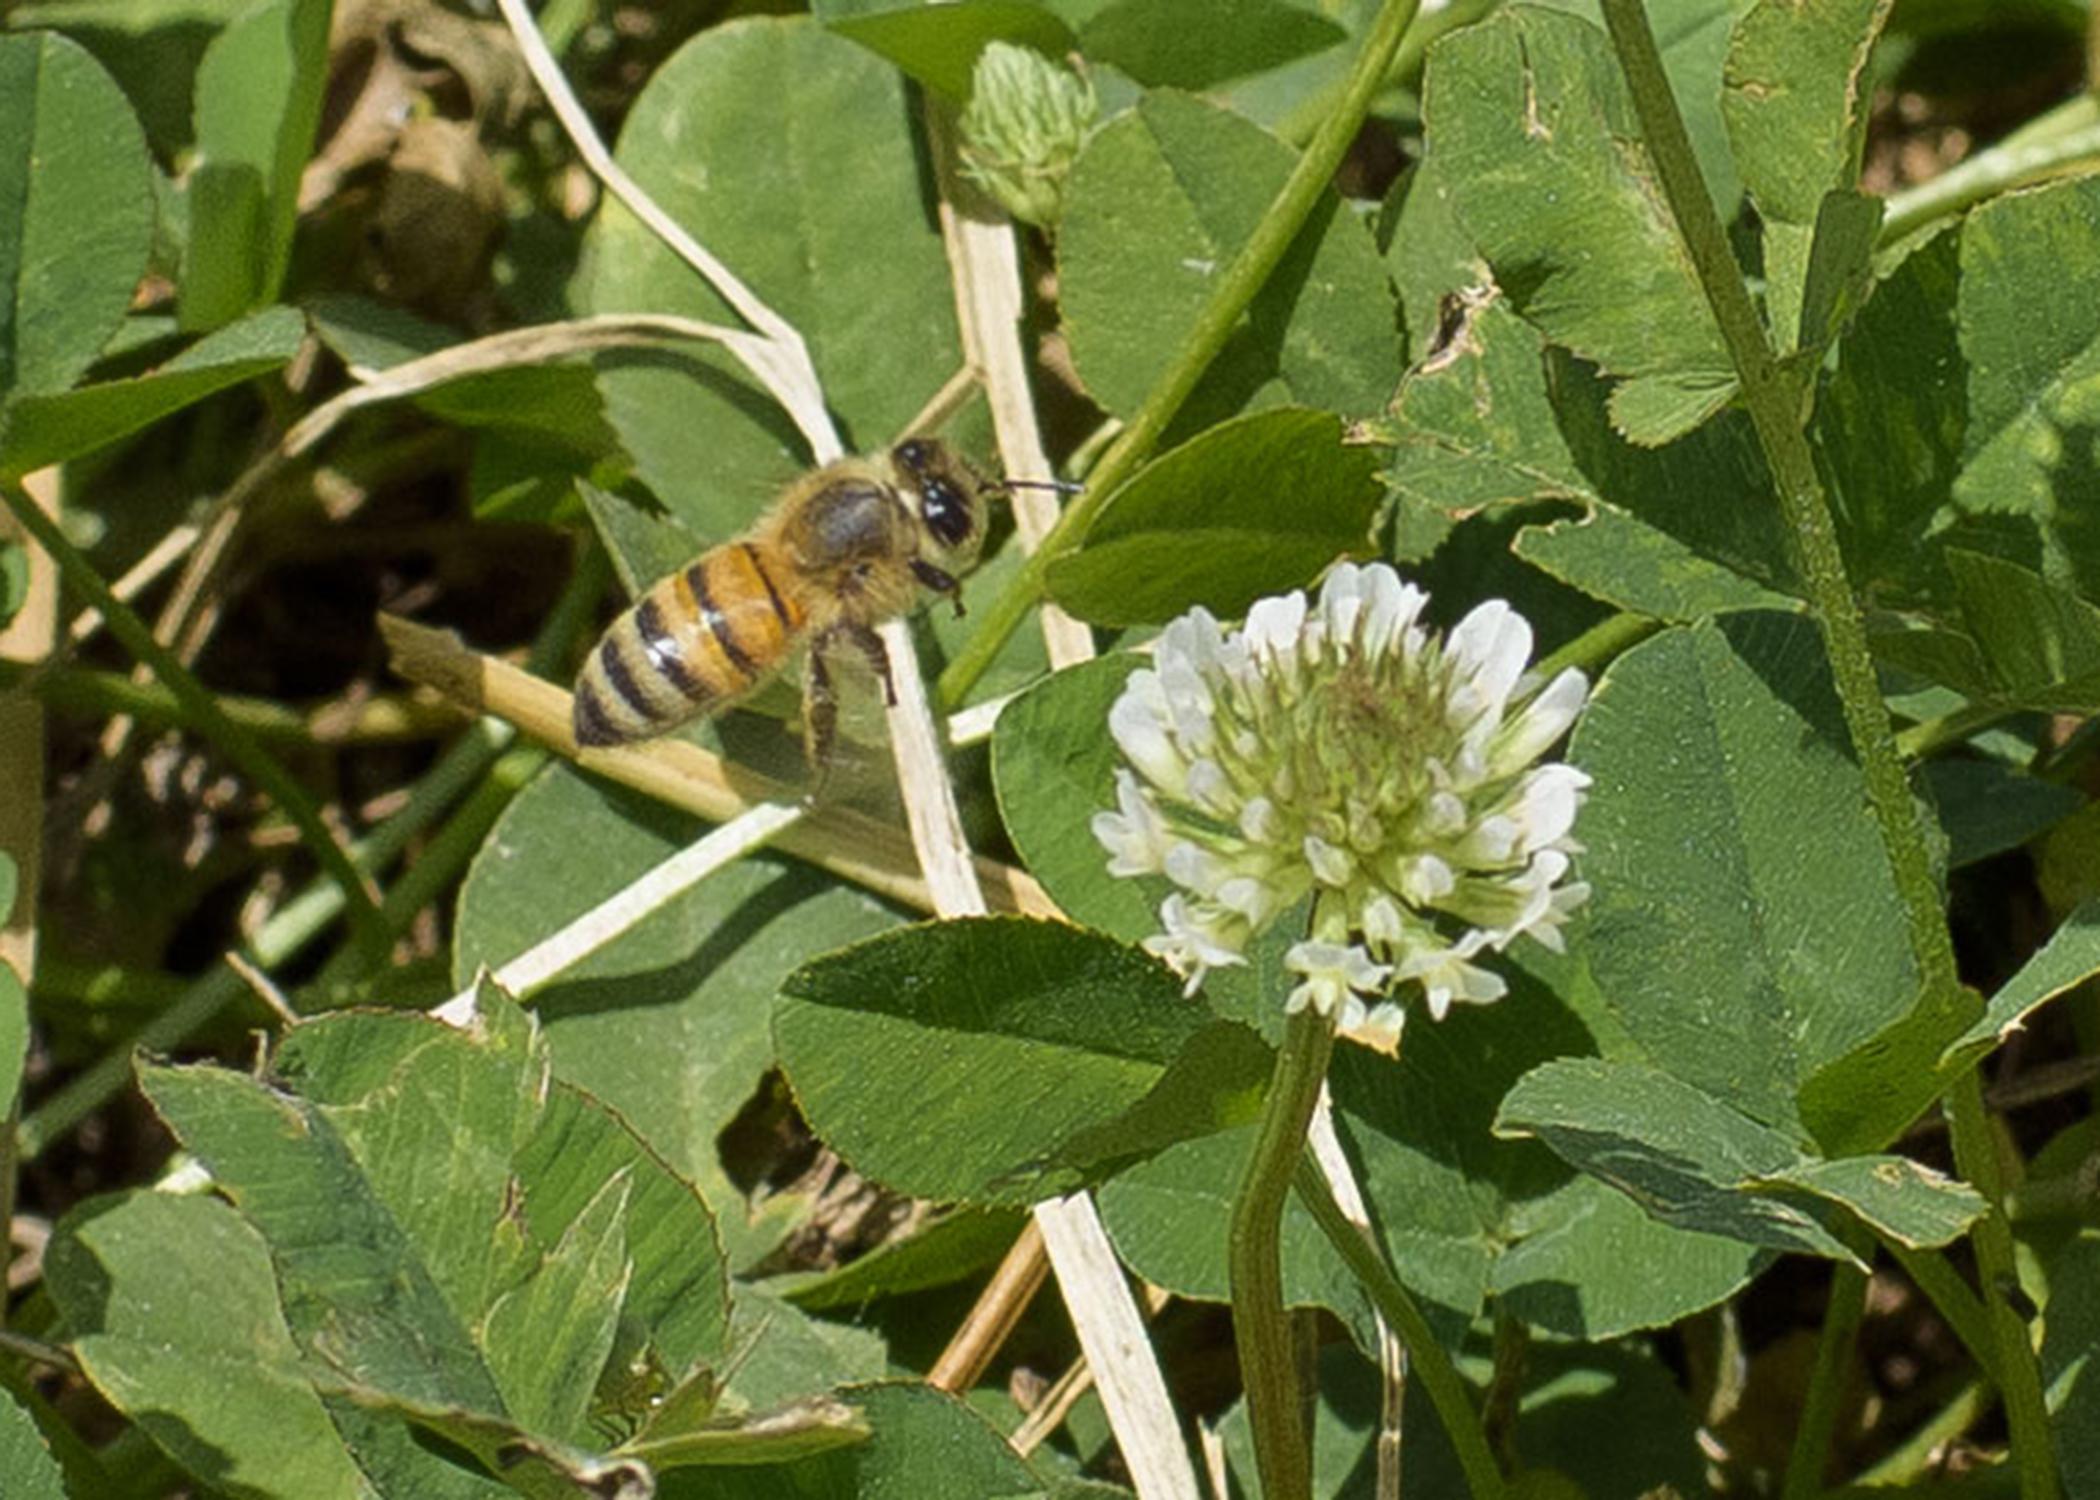 A bee feeds on clover in the pollinator project garden at the Mississippi State University R.R. Foil Plant Science Research Center in Starkville June 16, 2015. (Photo by Kevin Hudson/MSU Ag Communications)